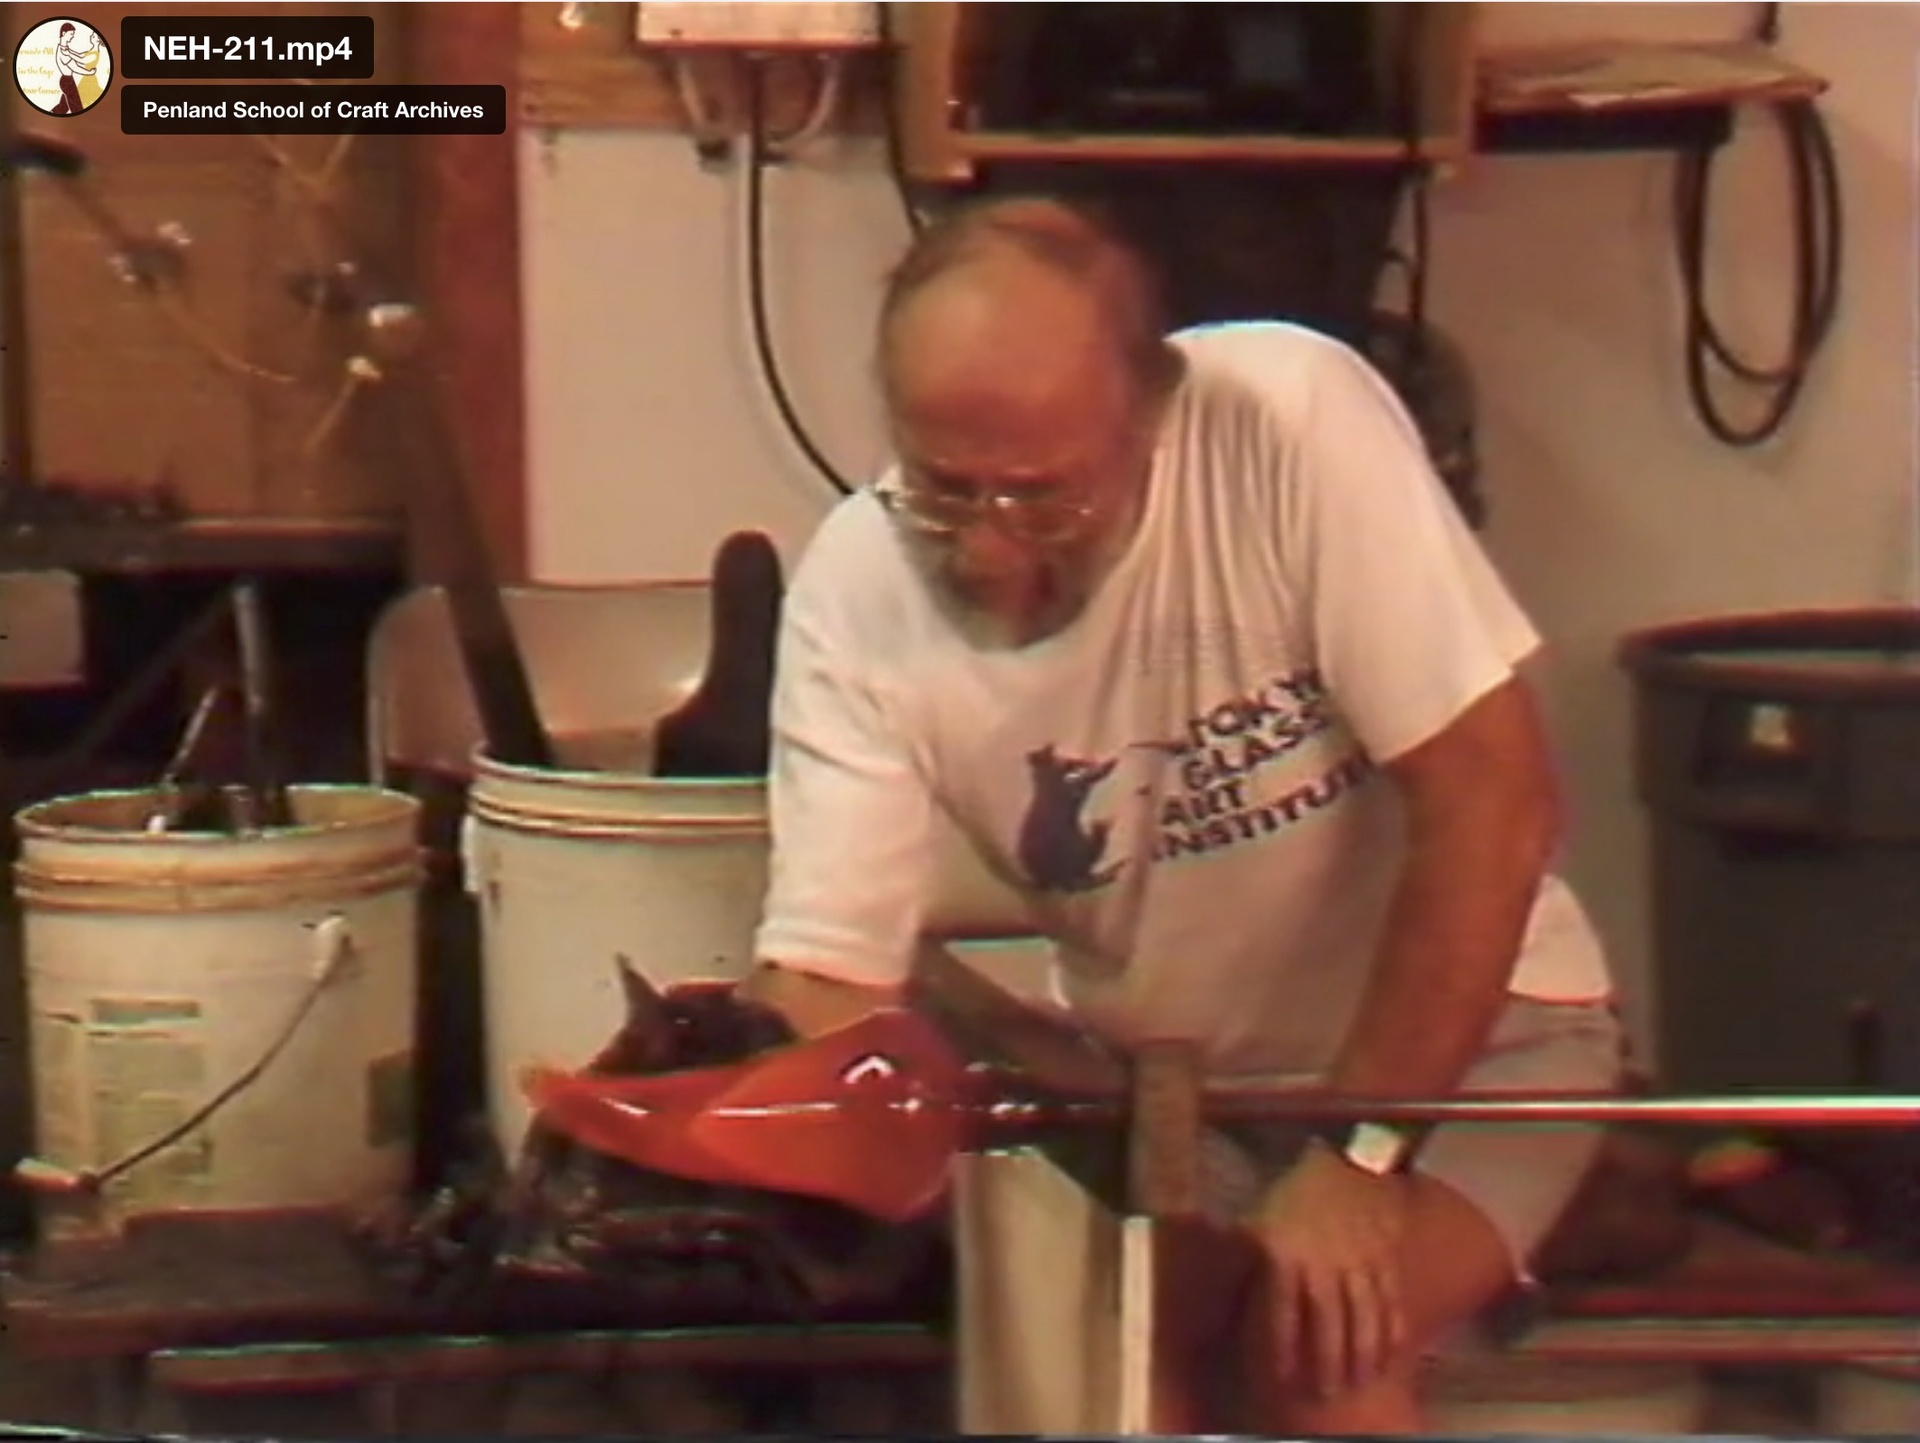 Still from a video of studio glass pioneer Harvey Littleton. Image courtesy of Penland School of Craft.